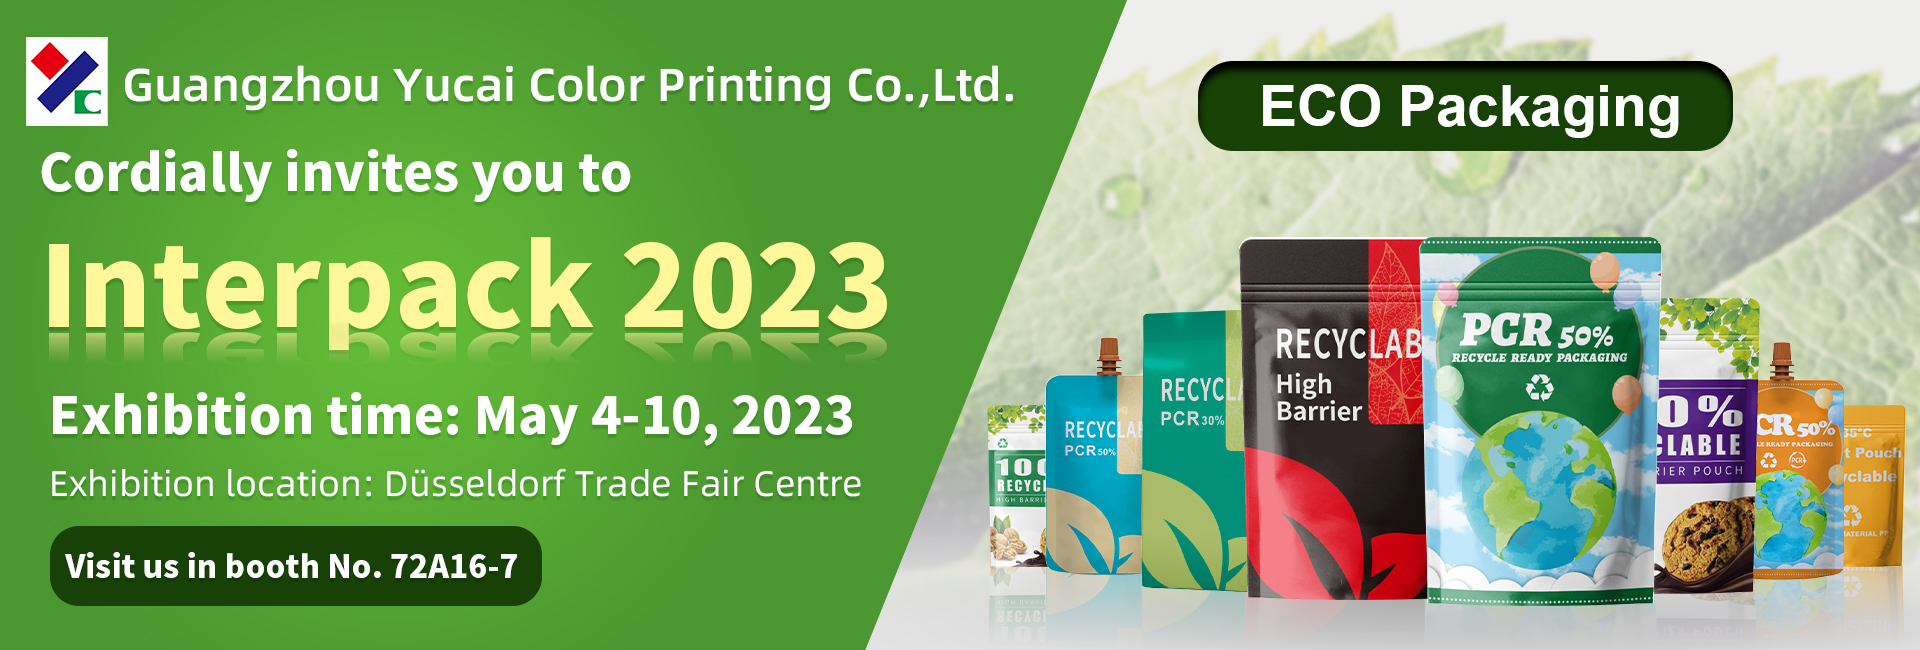 news-Cordially invites you to Pack Expo 2022 Wait for you at booth #W-28022-Yucai-img